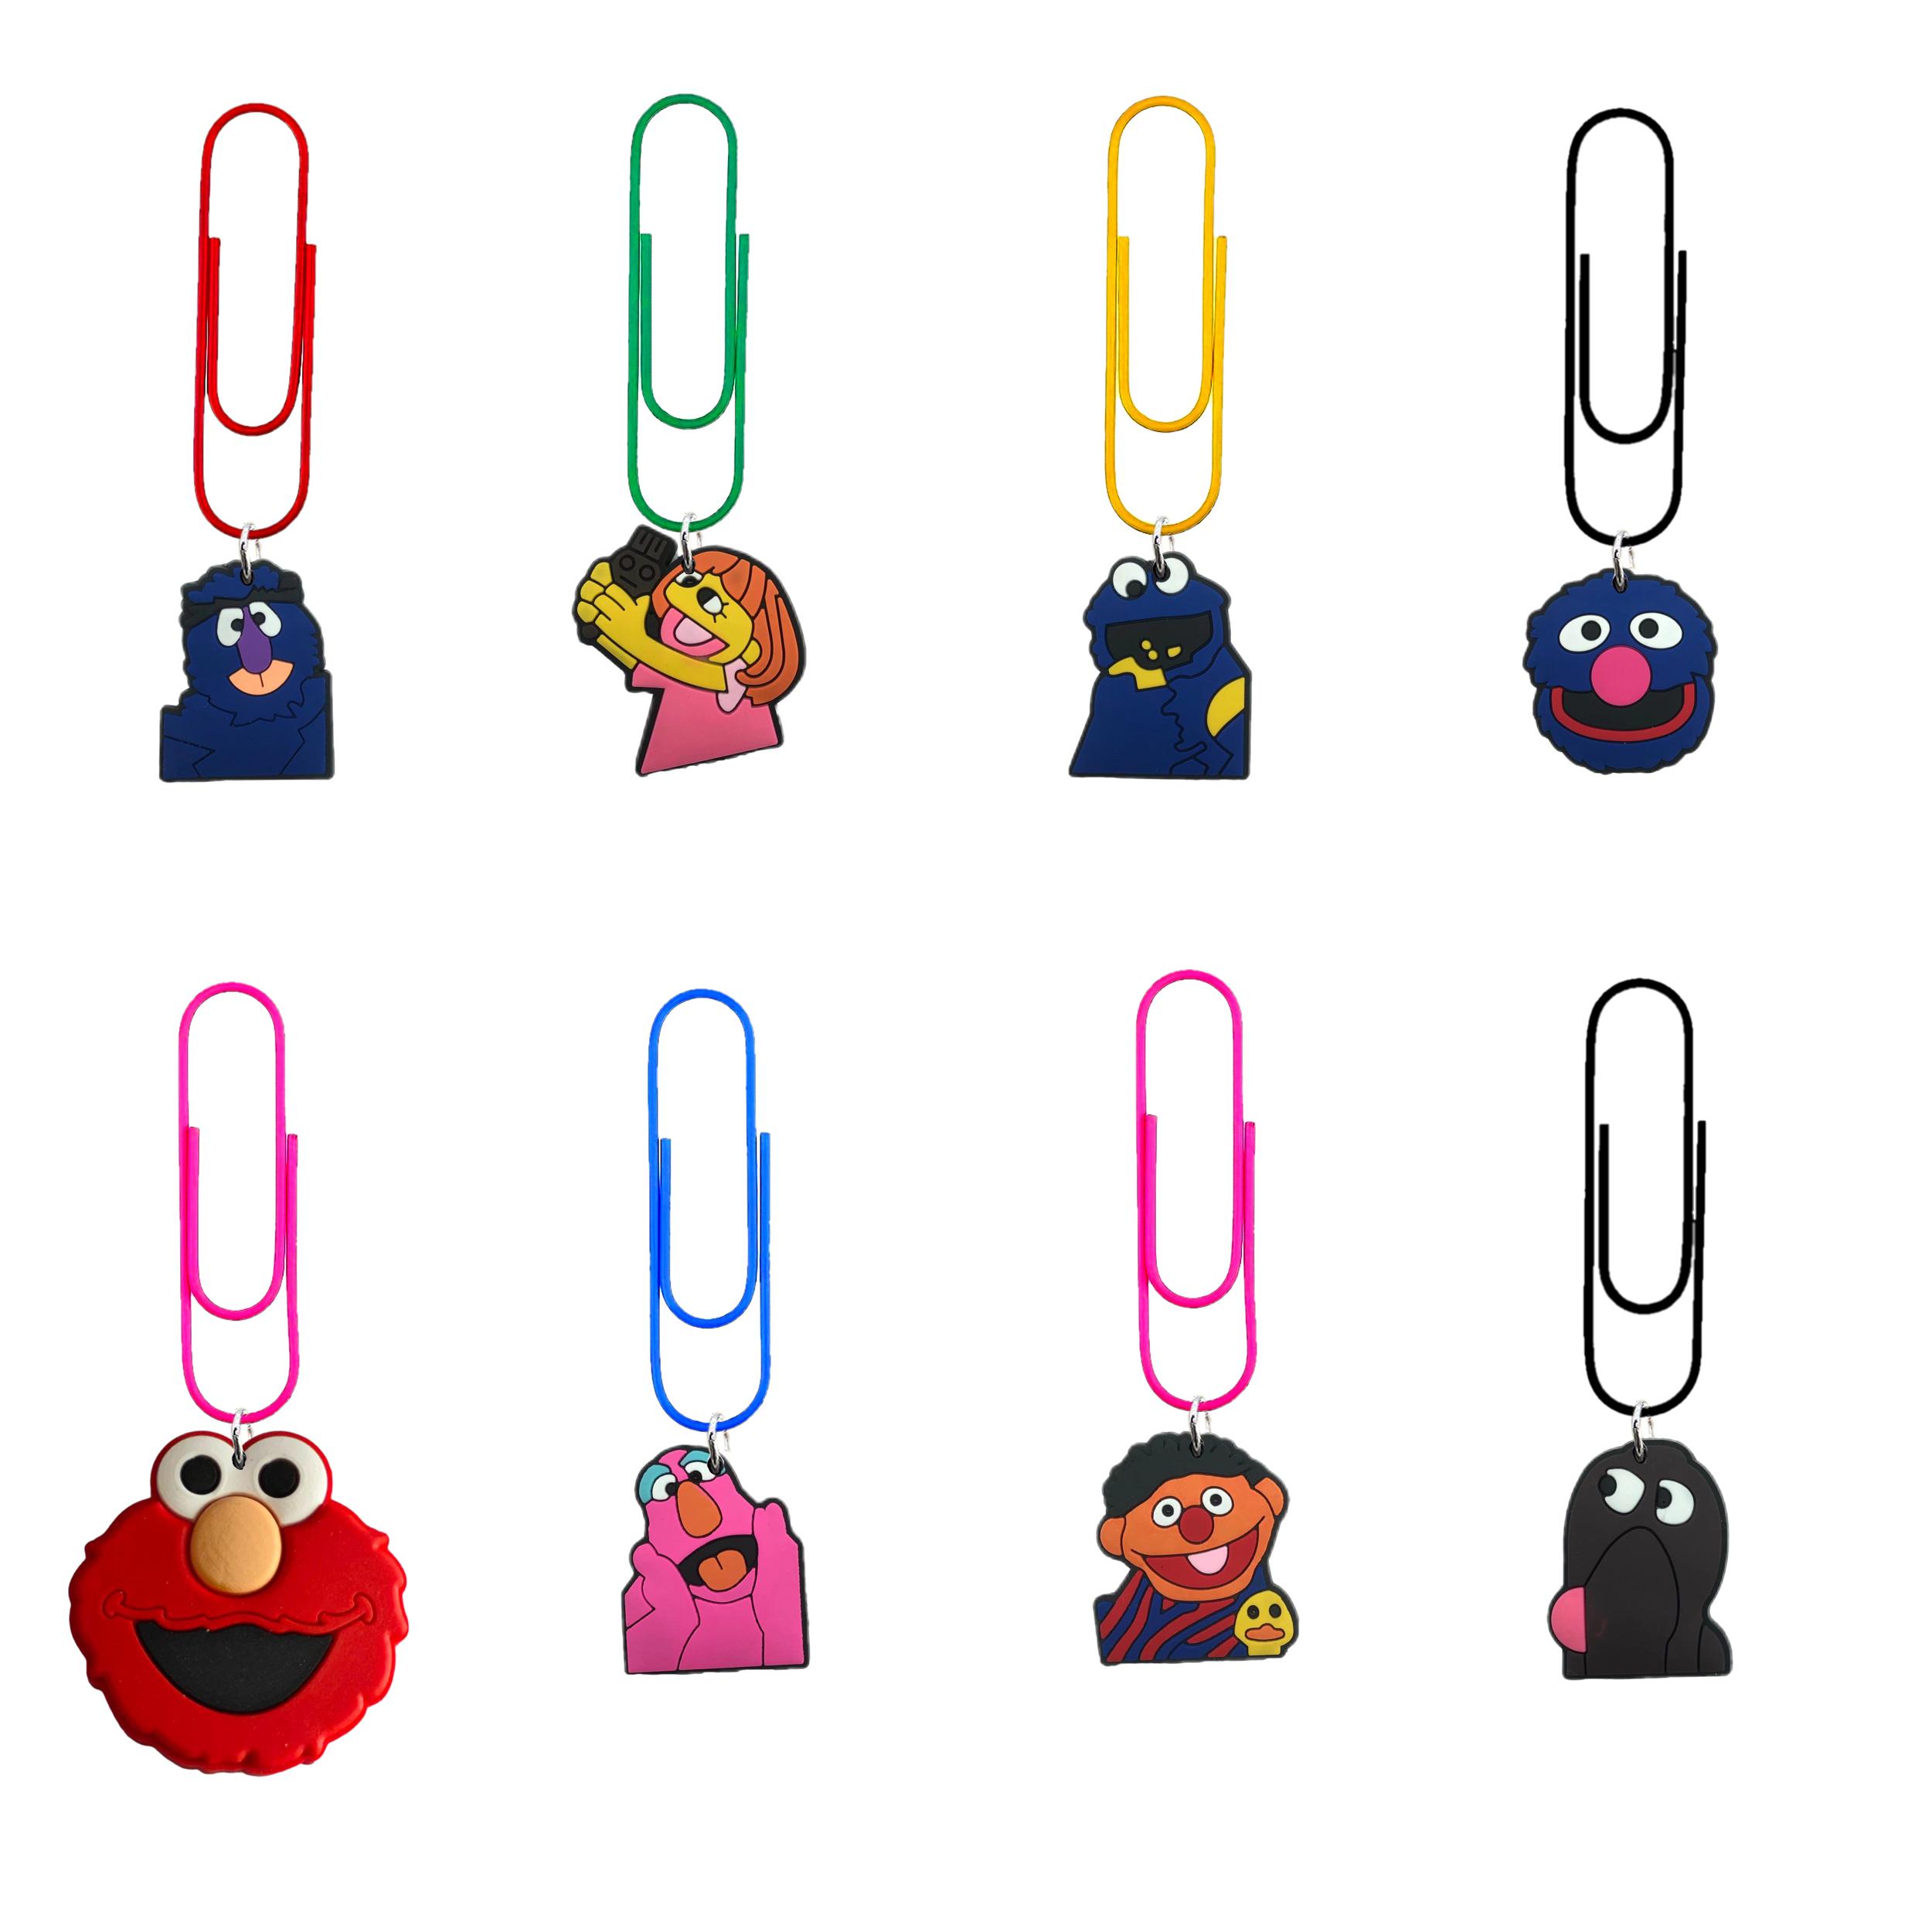 Penndants Sesame Street Cartoon Clips Paper Funny Bookmarks Paperclips Colorf Pagination Gifts For Girls Cute Bookmark Office Supplies Otoxi